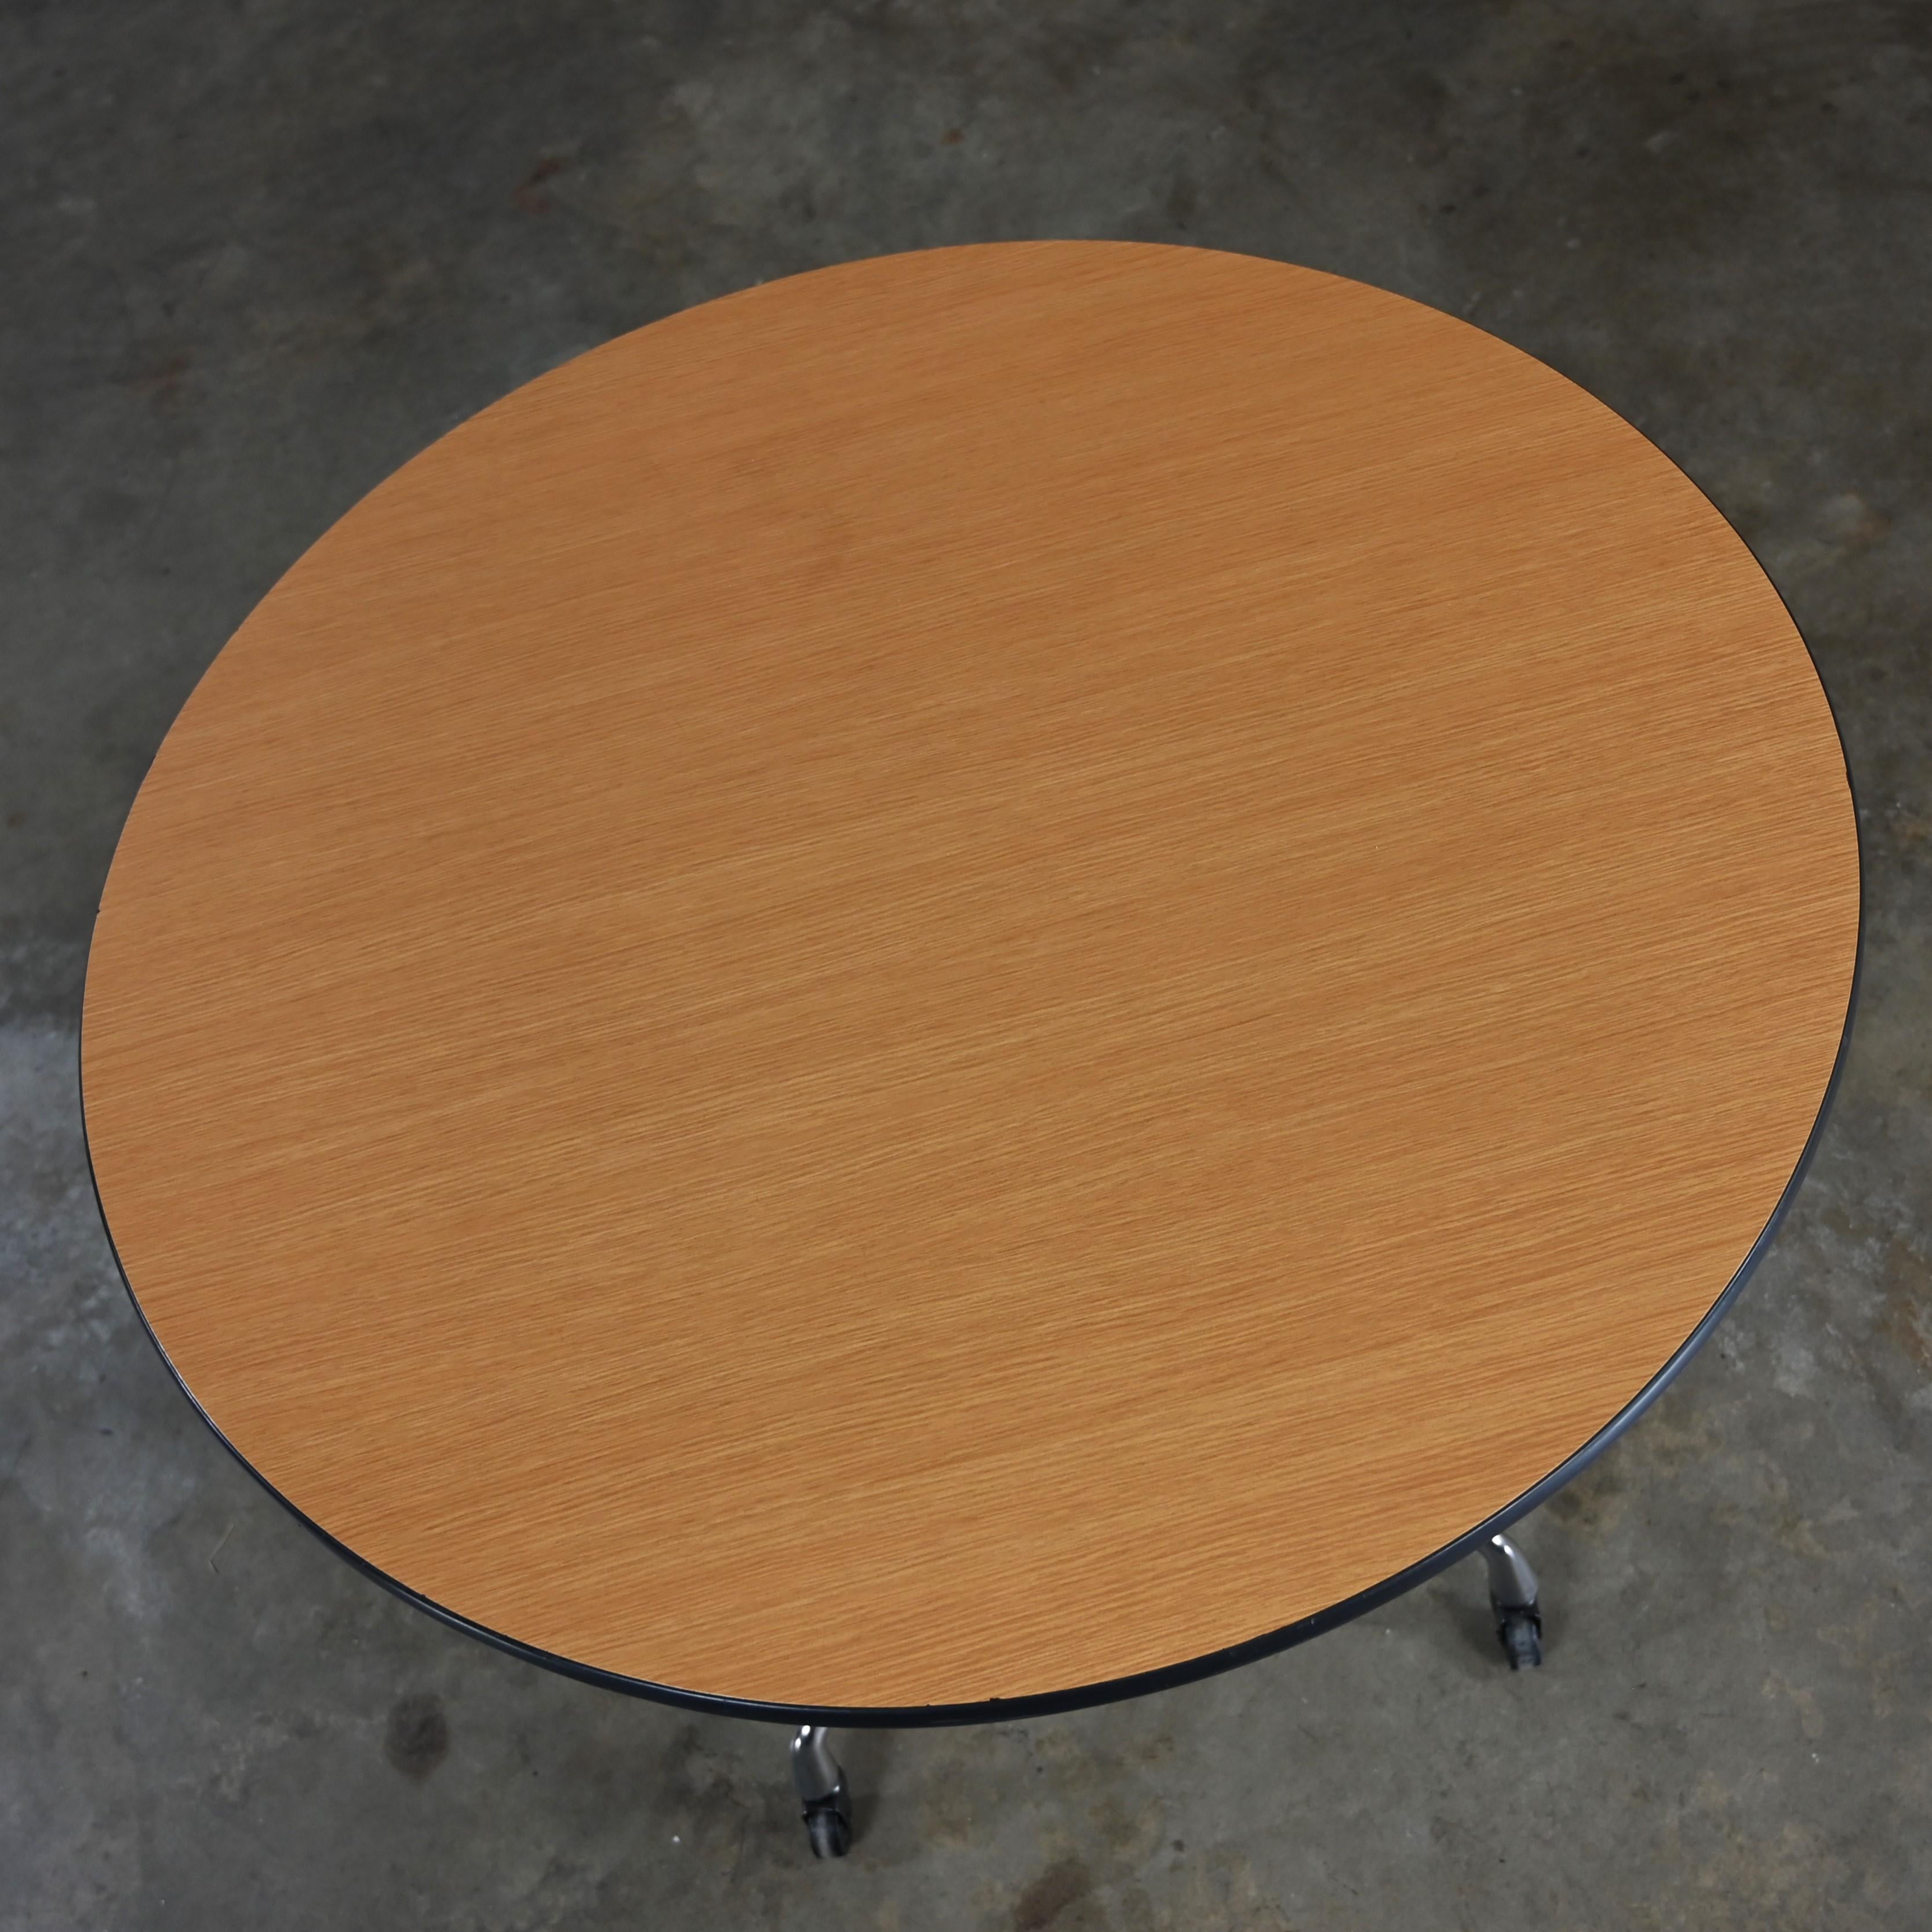 Aluminum Eames Herman Miller Round Table Universal Base Casters & 36” Blonde Laminate Top For Sale